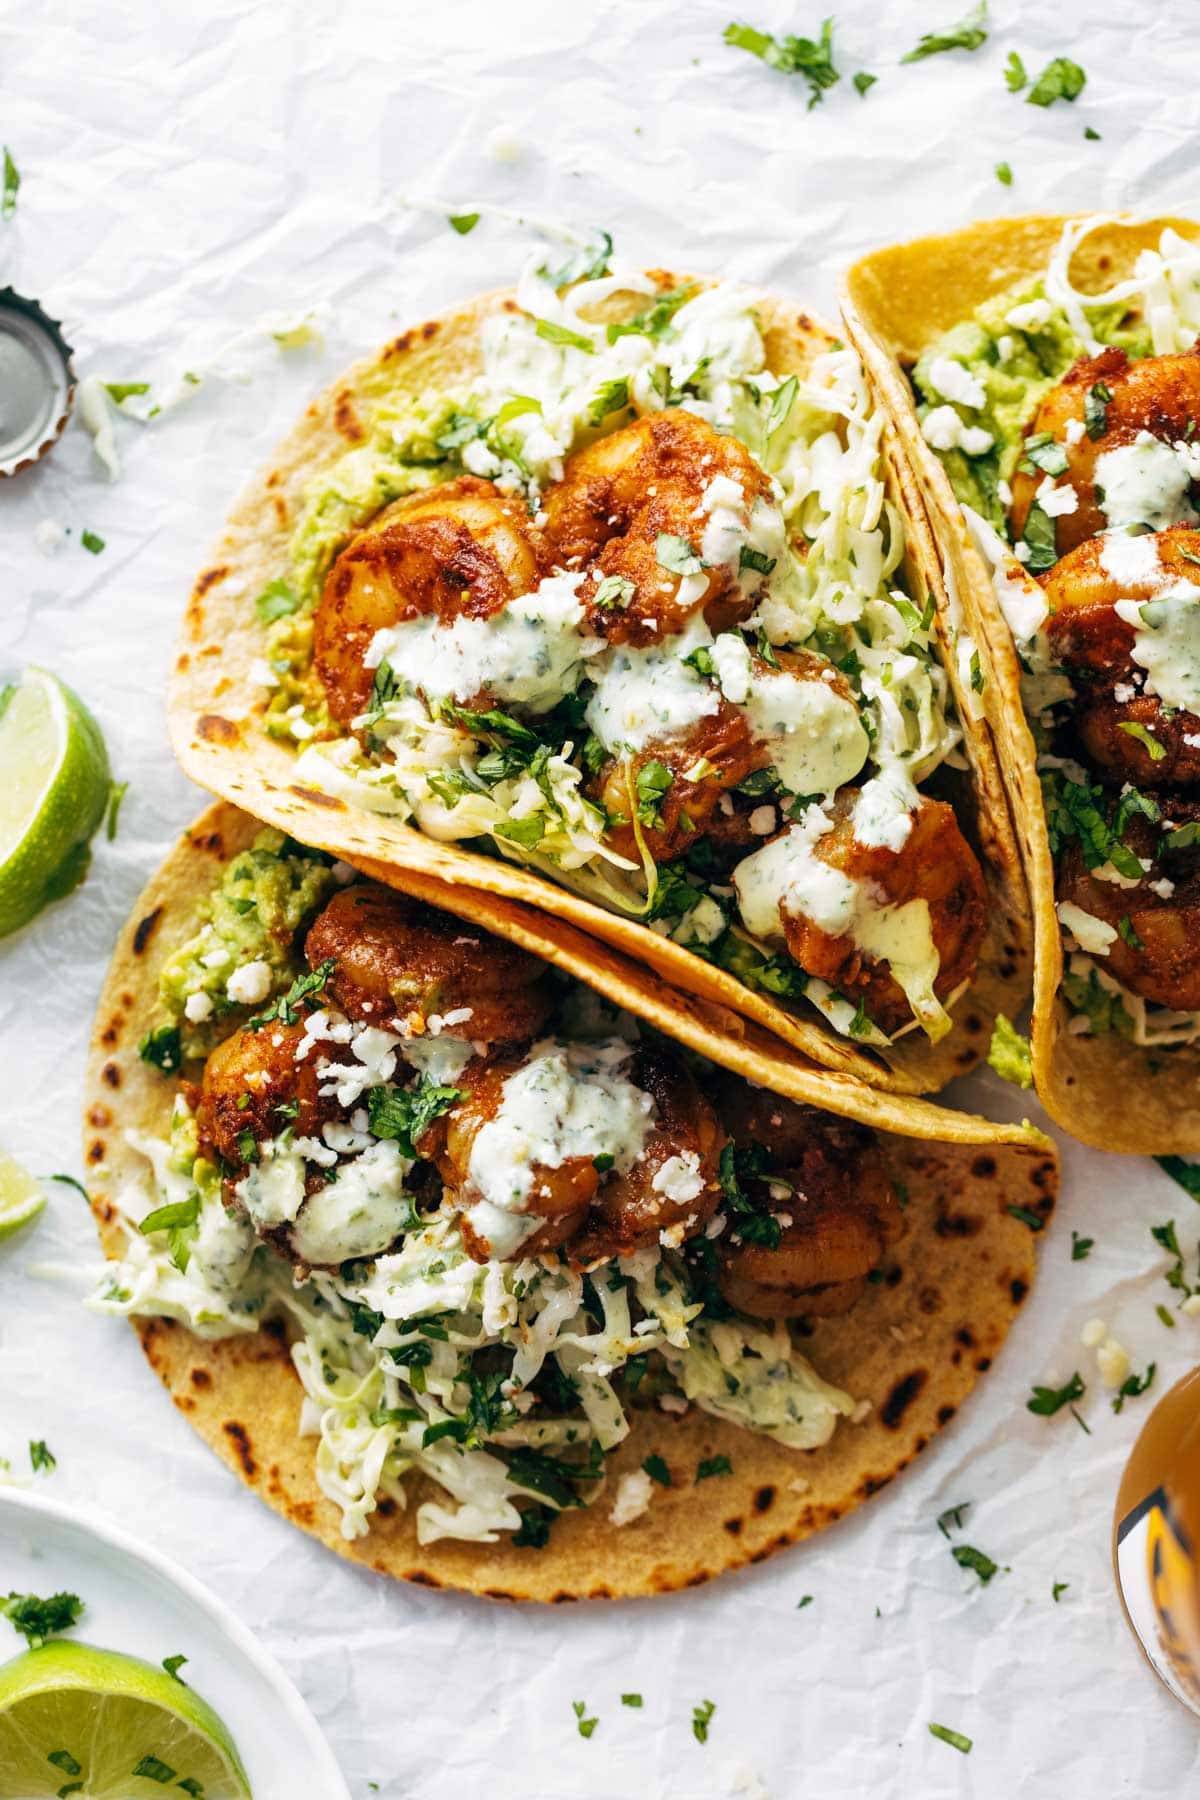 Spicy shrimp tacos with sauce.